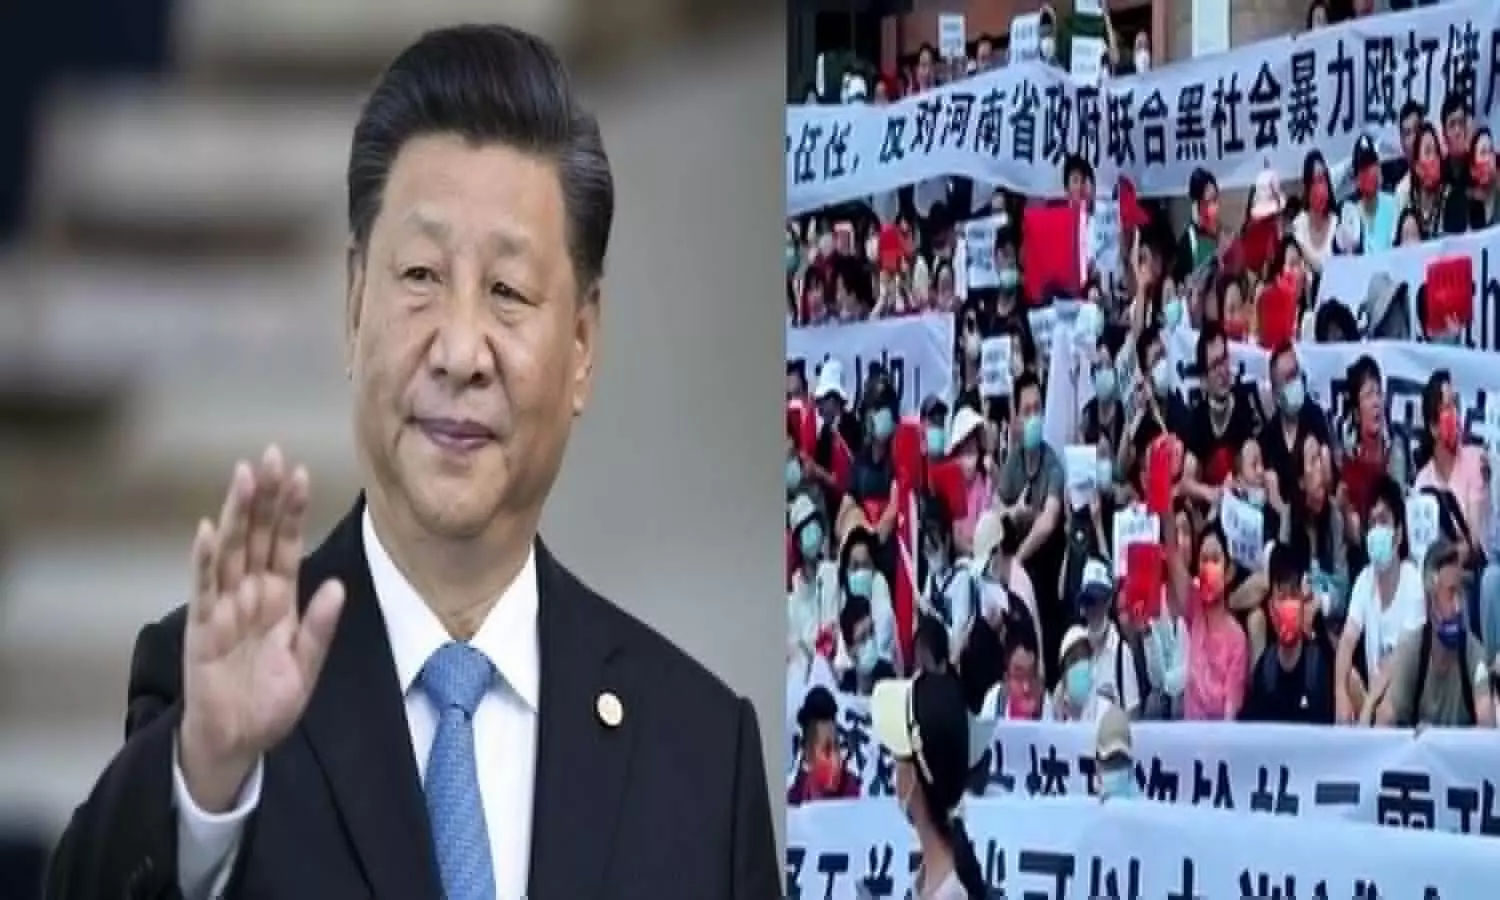 Huge opposition to Jinping ahead of third coronation in China, banners against dictatorship, mass arrests